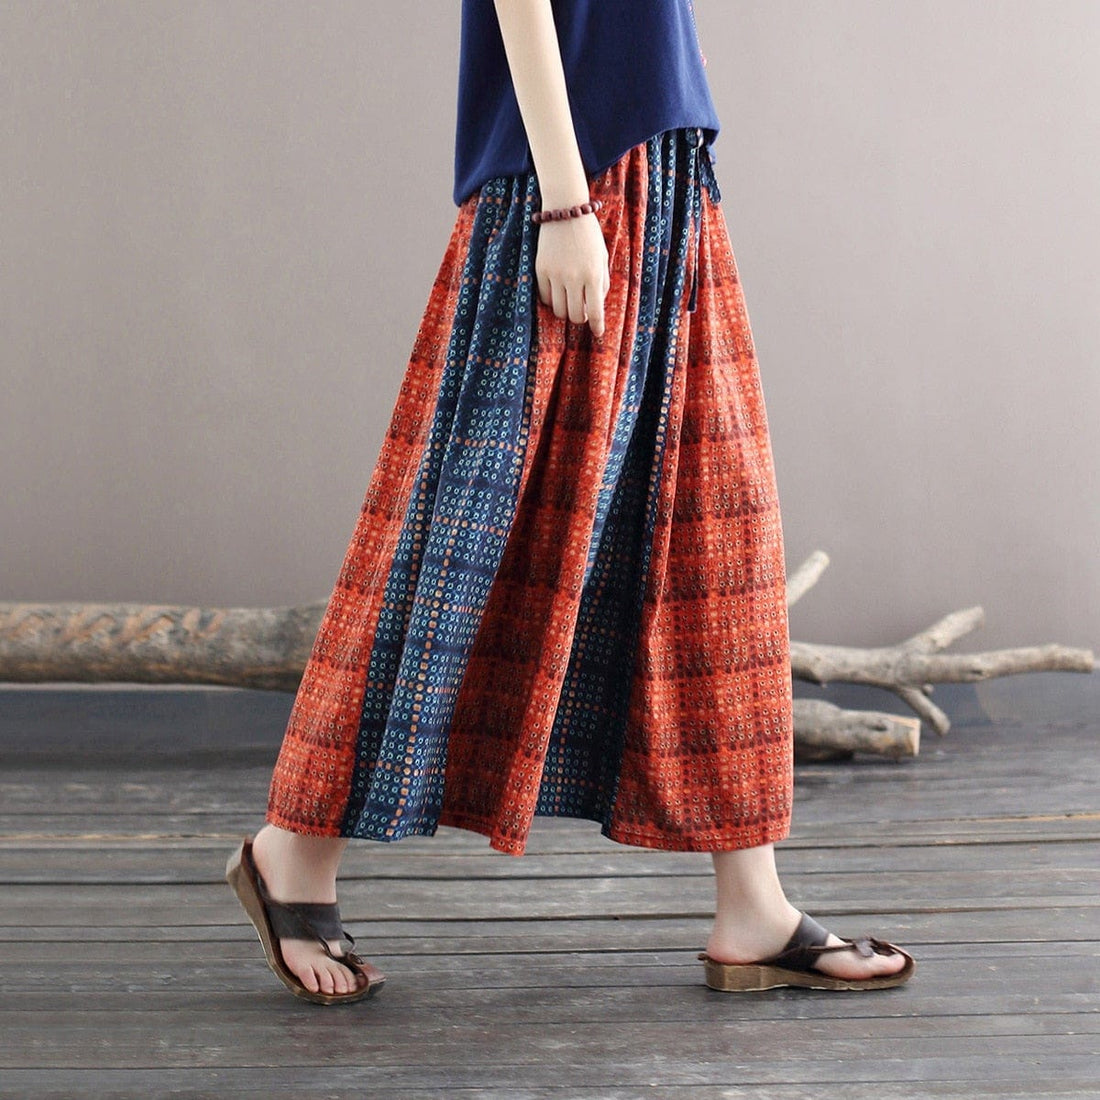 Buddhatrends Skirts Remy Plaid A-Line Skirts